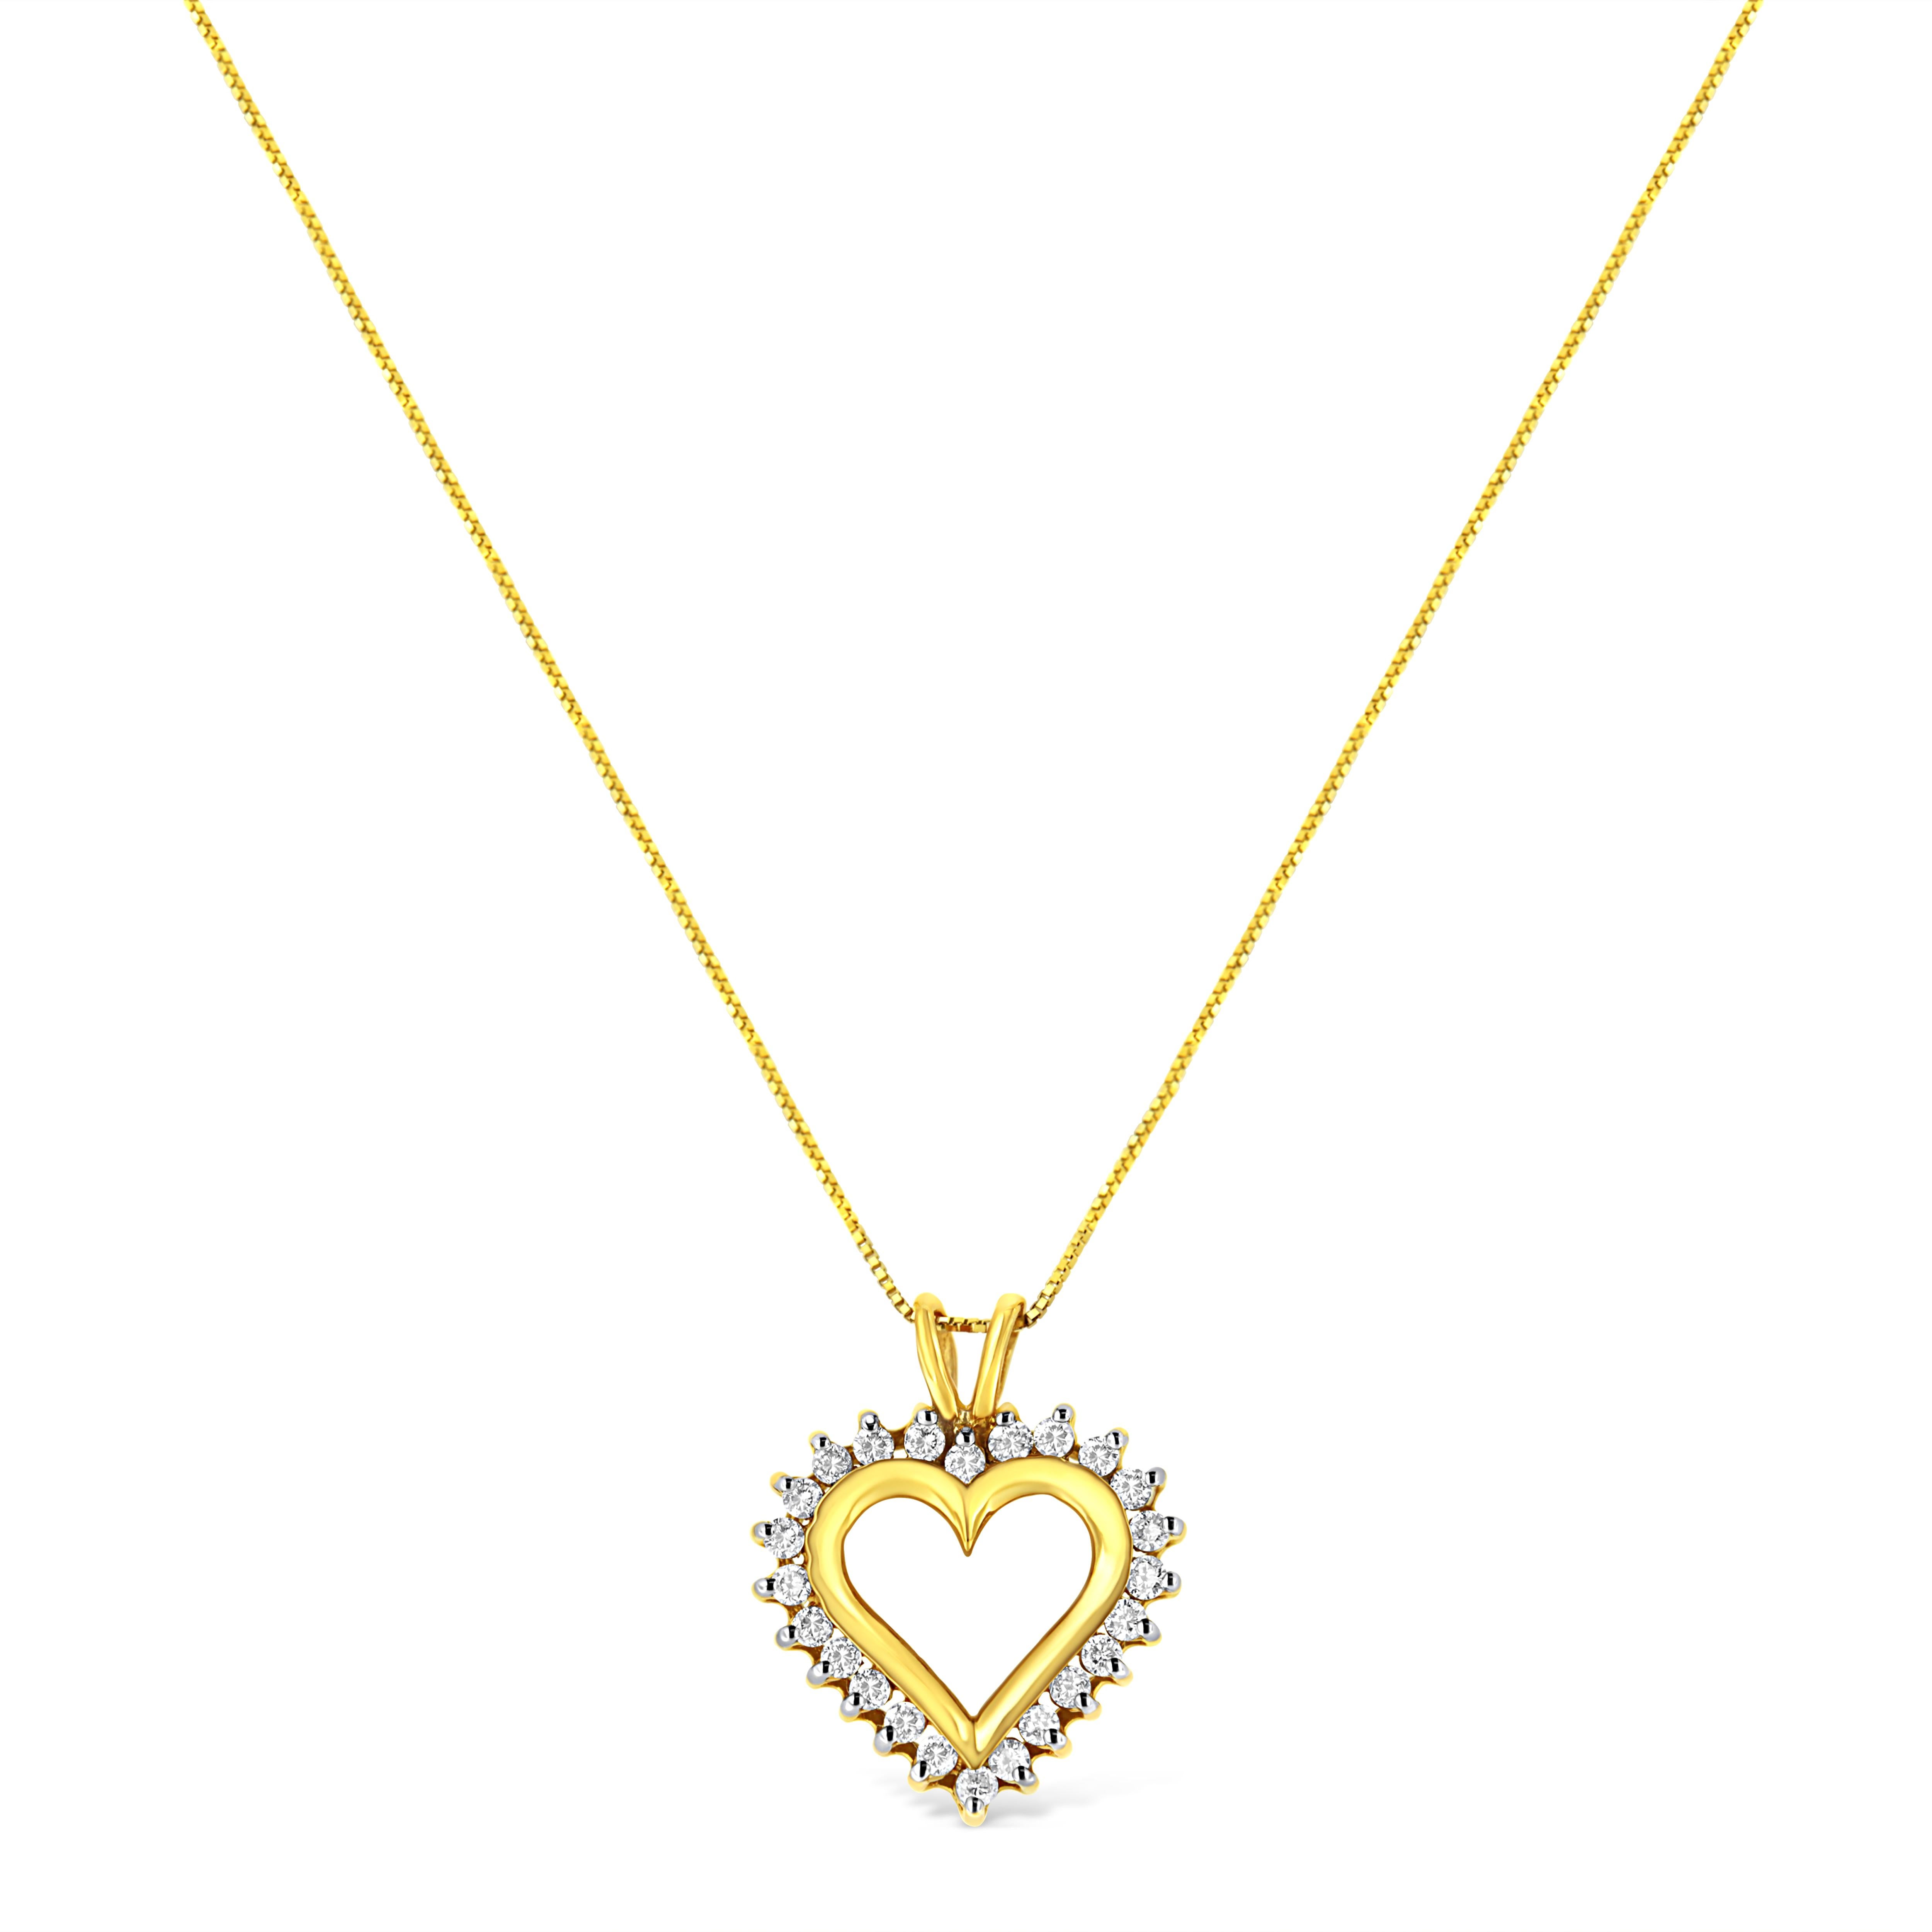 A light-hearted, enchanting display of romance. This romantic open heart diamond pendant is bejeweled with a sunburst of 24 round cut sparkling diamonds in prong setting and rendered elegantly on luminous 10 karat yellow gold. This classic pendant